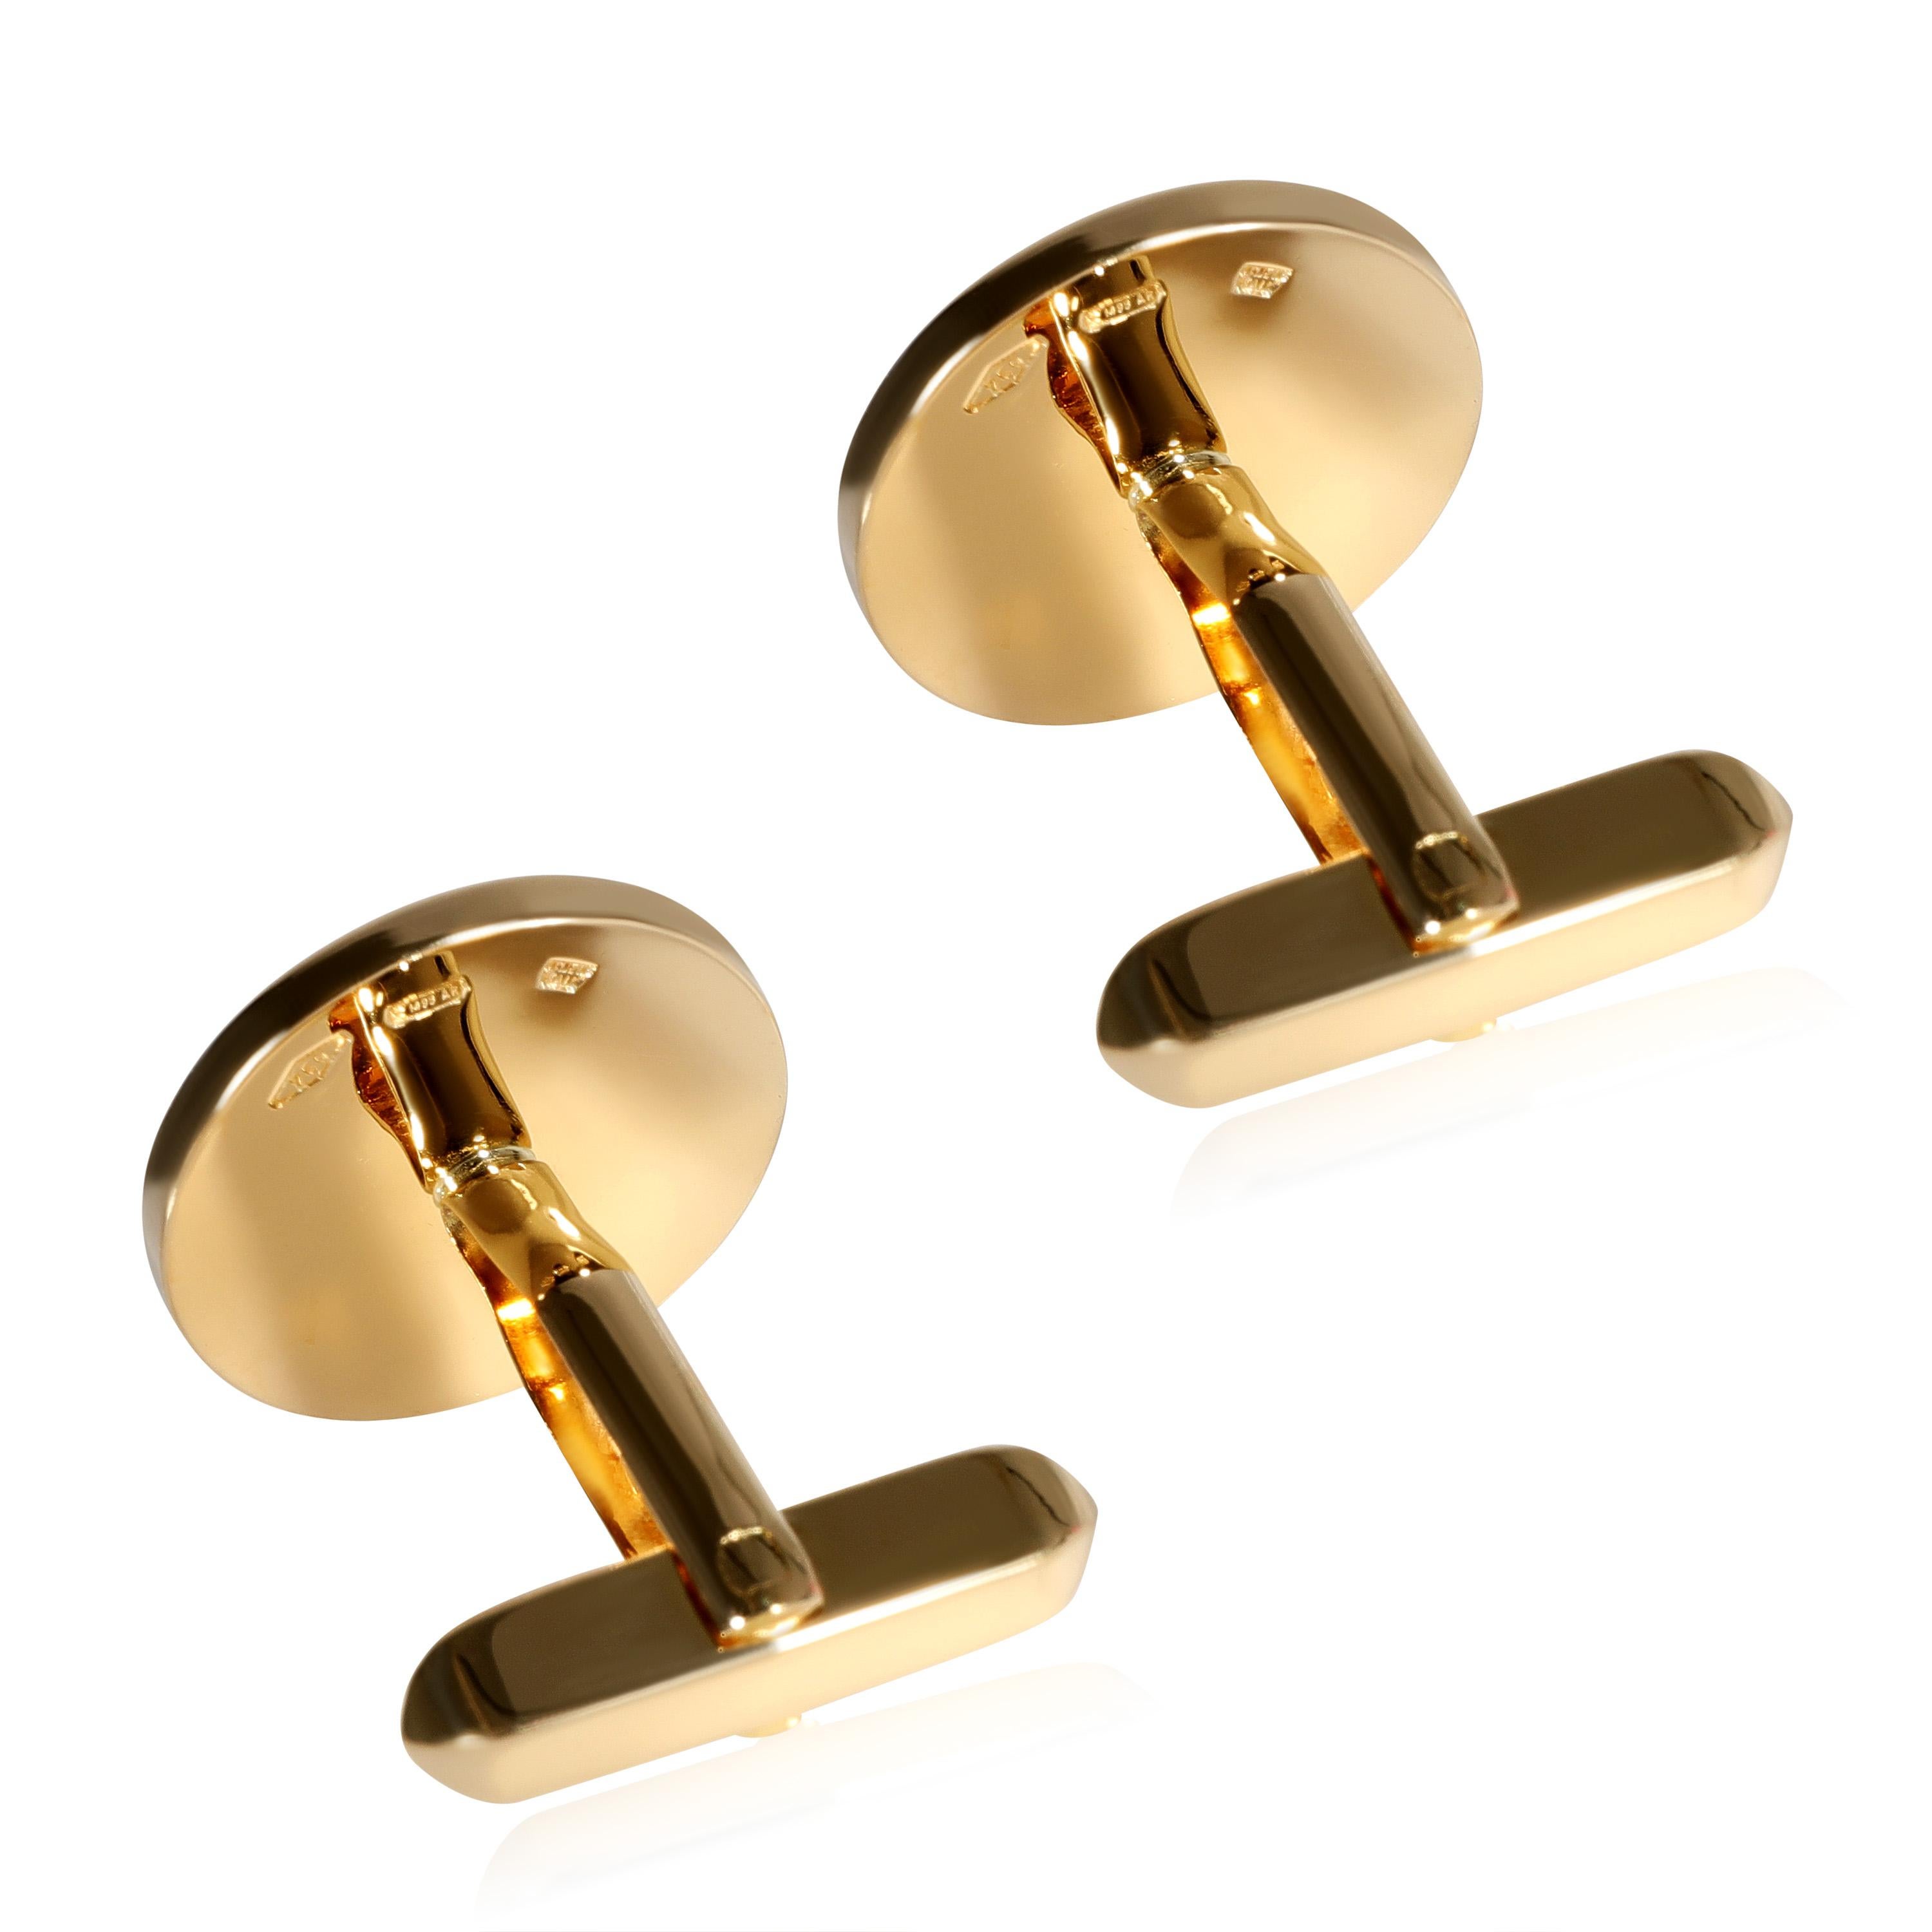 BVLGARI Bvlgari Bvlgari Vintage Cufflinks in 18K Yellow Gold

PRIMARY DETAILS
SKU: 122352
Listing Title: BVLGARI Bvlgari Bvlgari Vintage Cufflinks in 18K Yellow Gold
Condition Description: Retails for 2900 USD. In excellent condition and recently